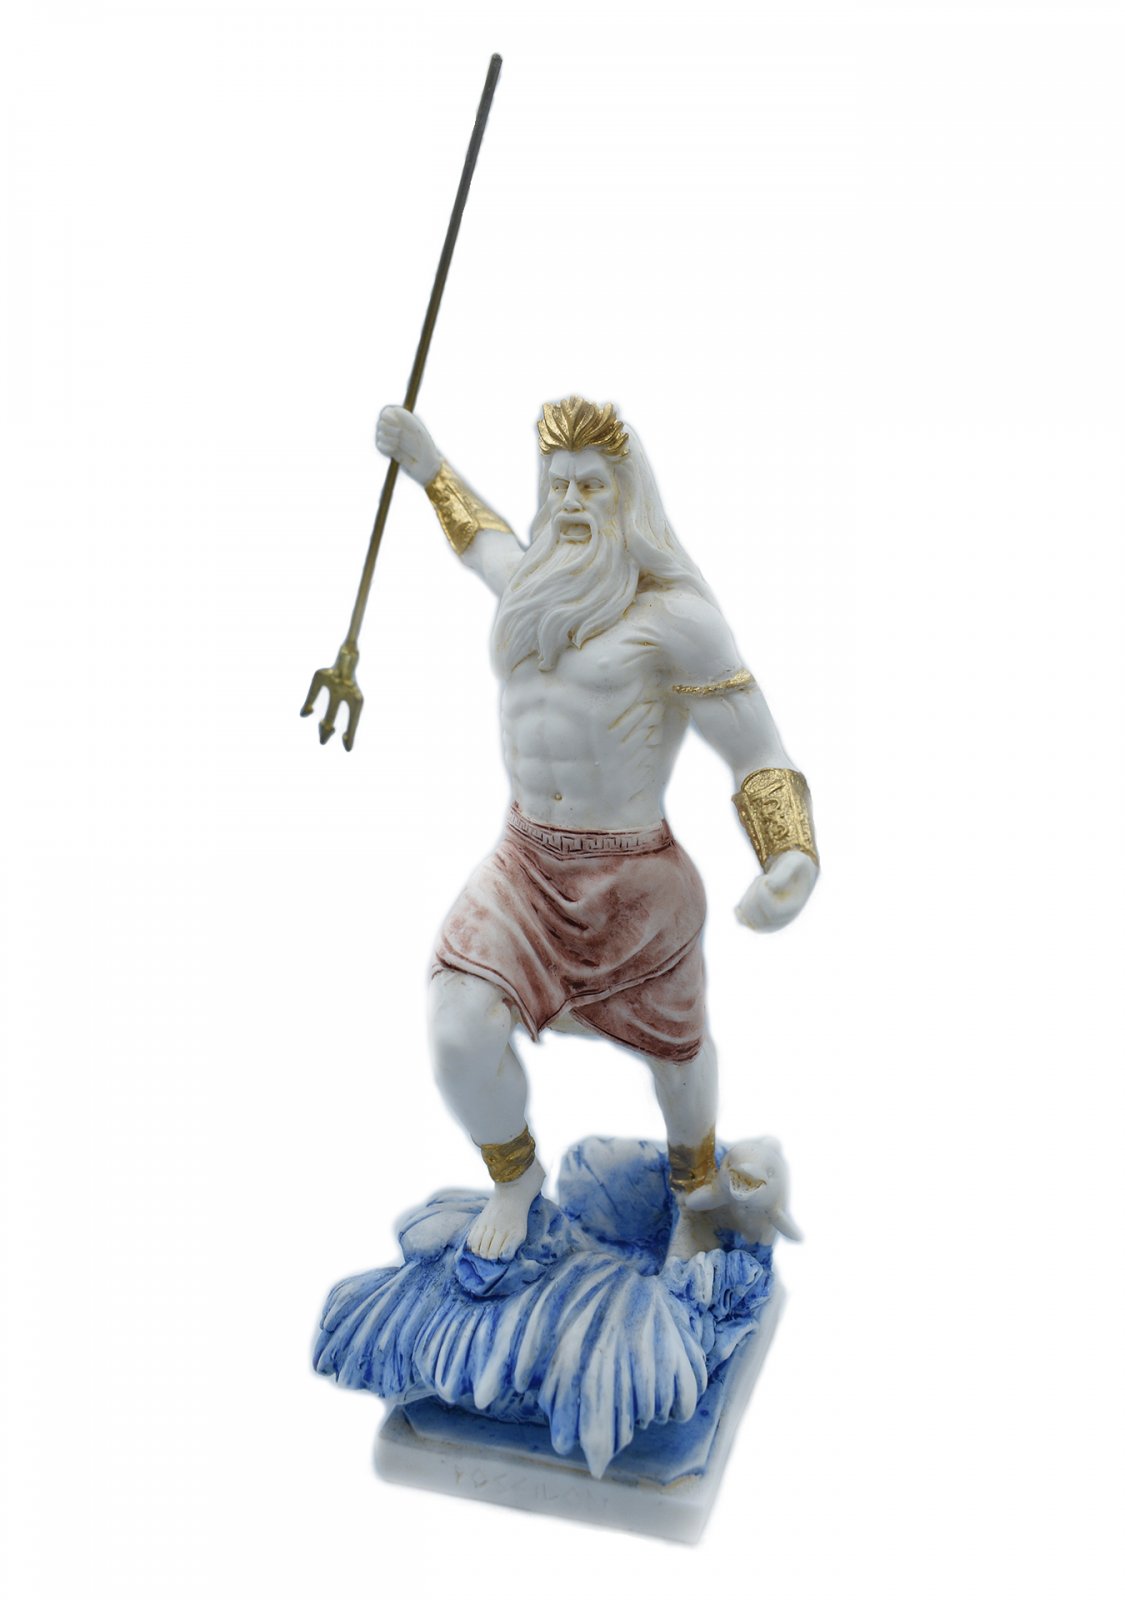 Greek alabaster statue of Poseidon with his trident